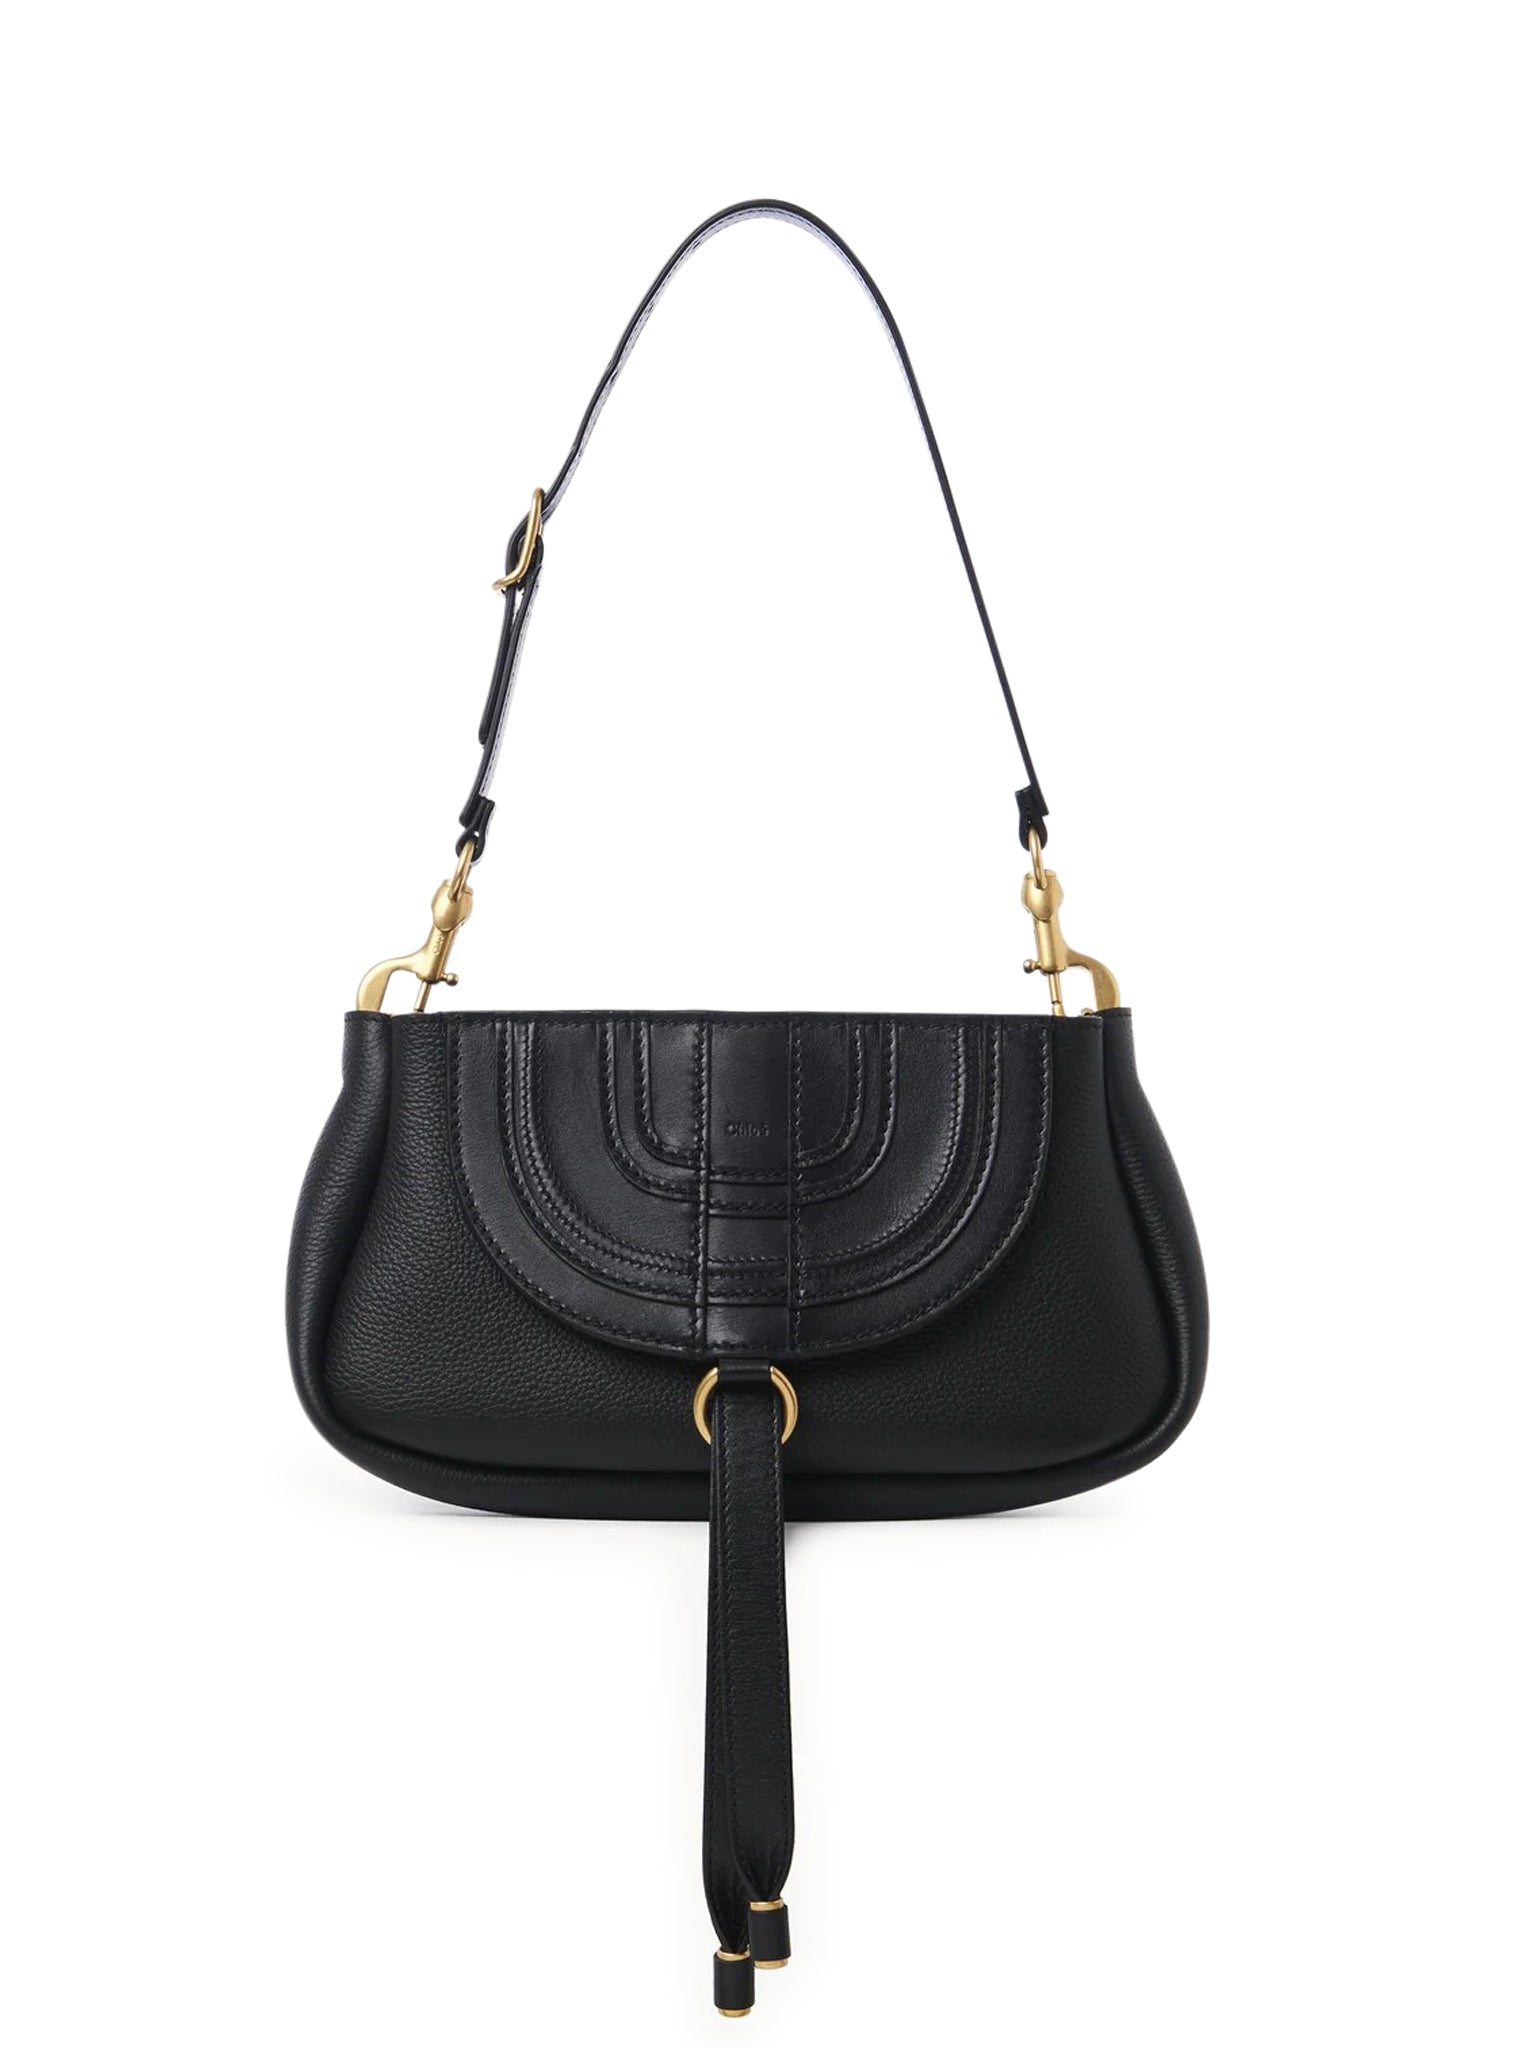 Gucci small ophidia GG shoulder bag black Size 23.5x19x8